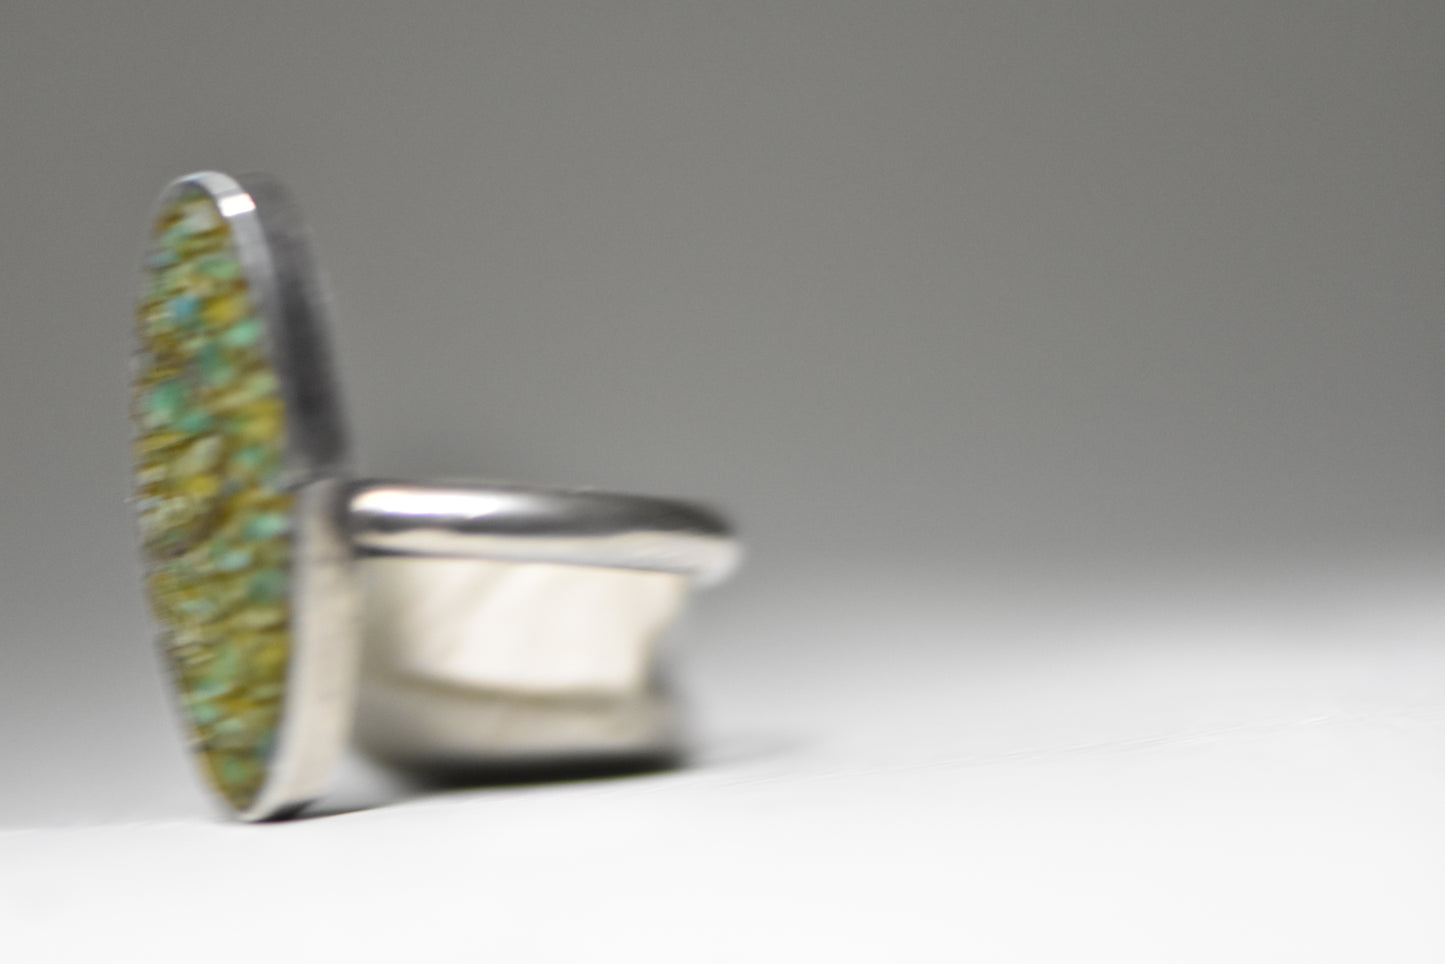 Turquoise chip ring long southwest sterling silver women girls